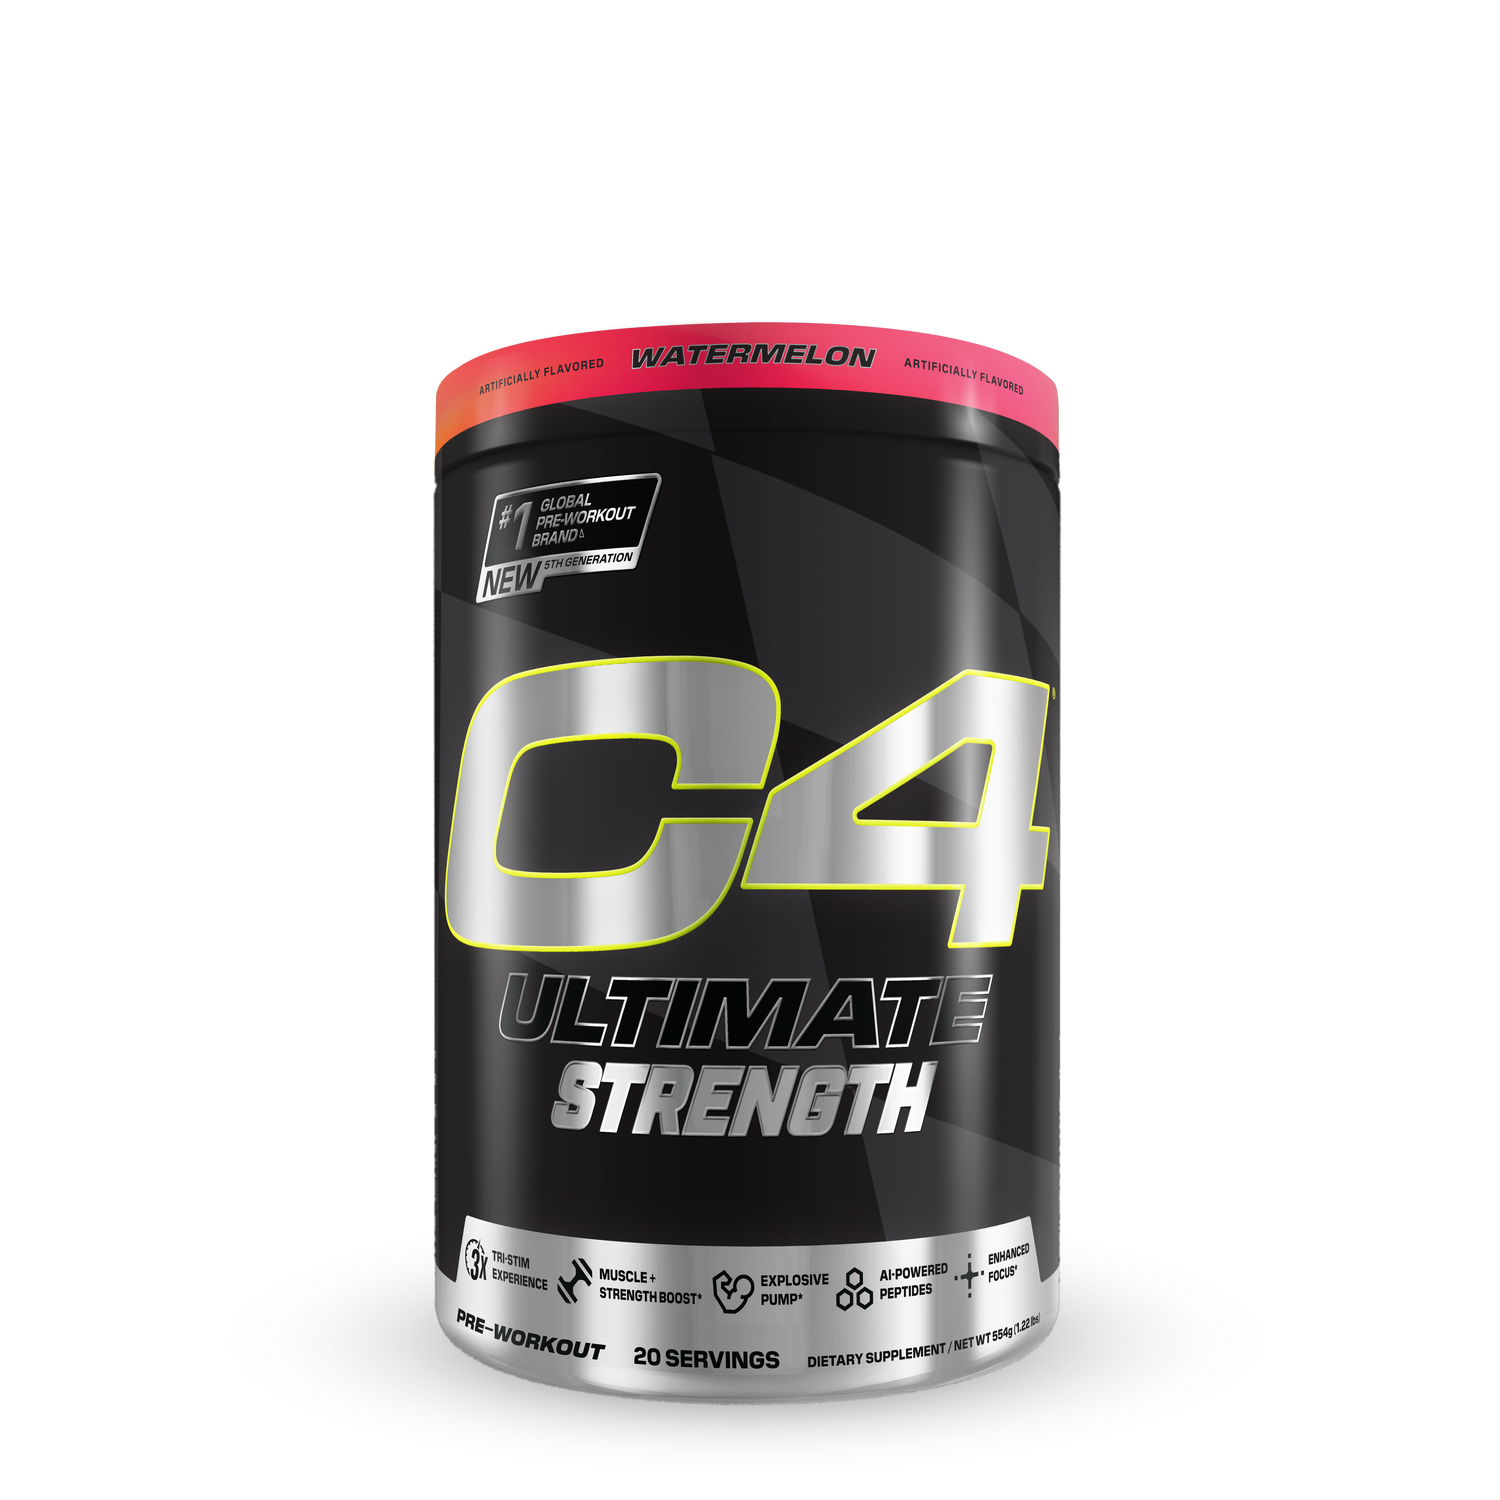 Cellucor C4 Ultimate Strength Pre-Workout - Watermelon (20 Servings)